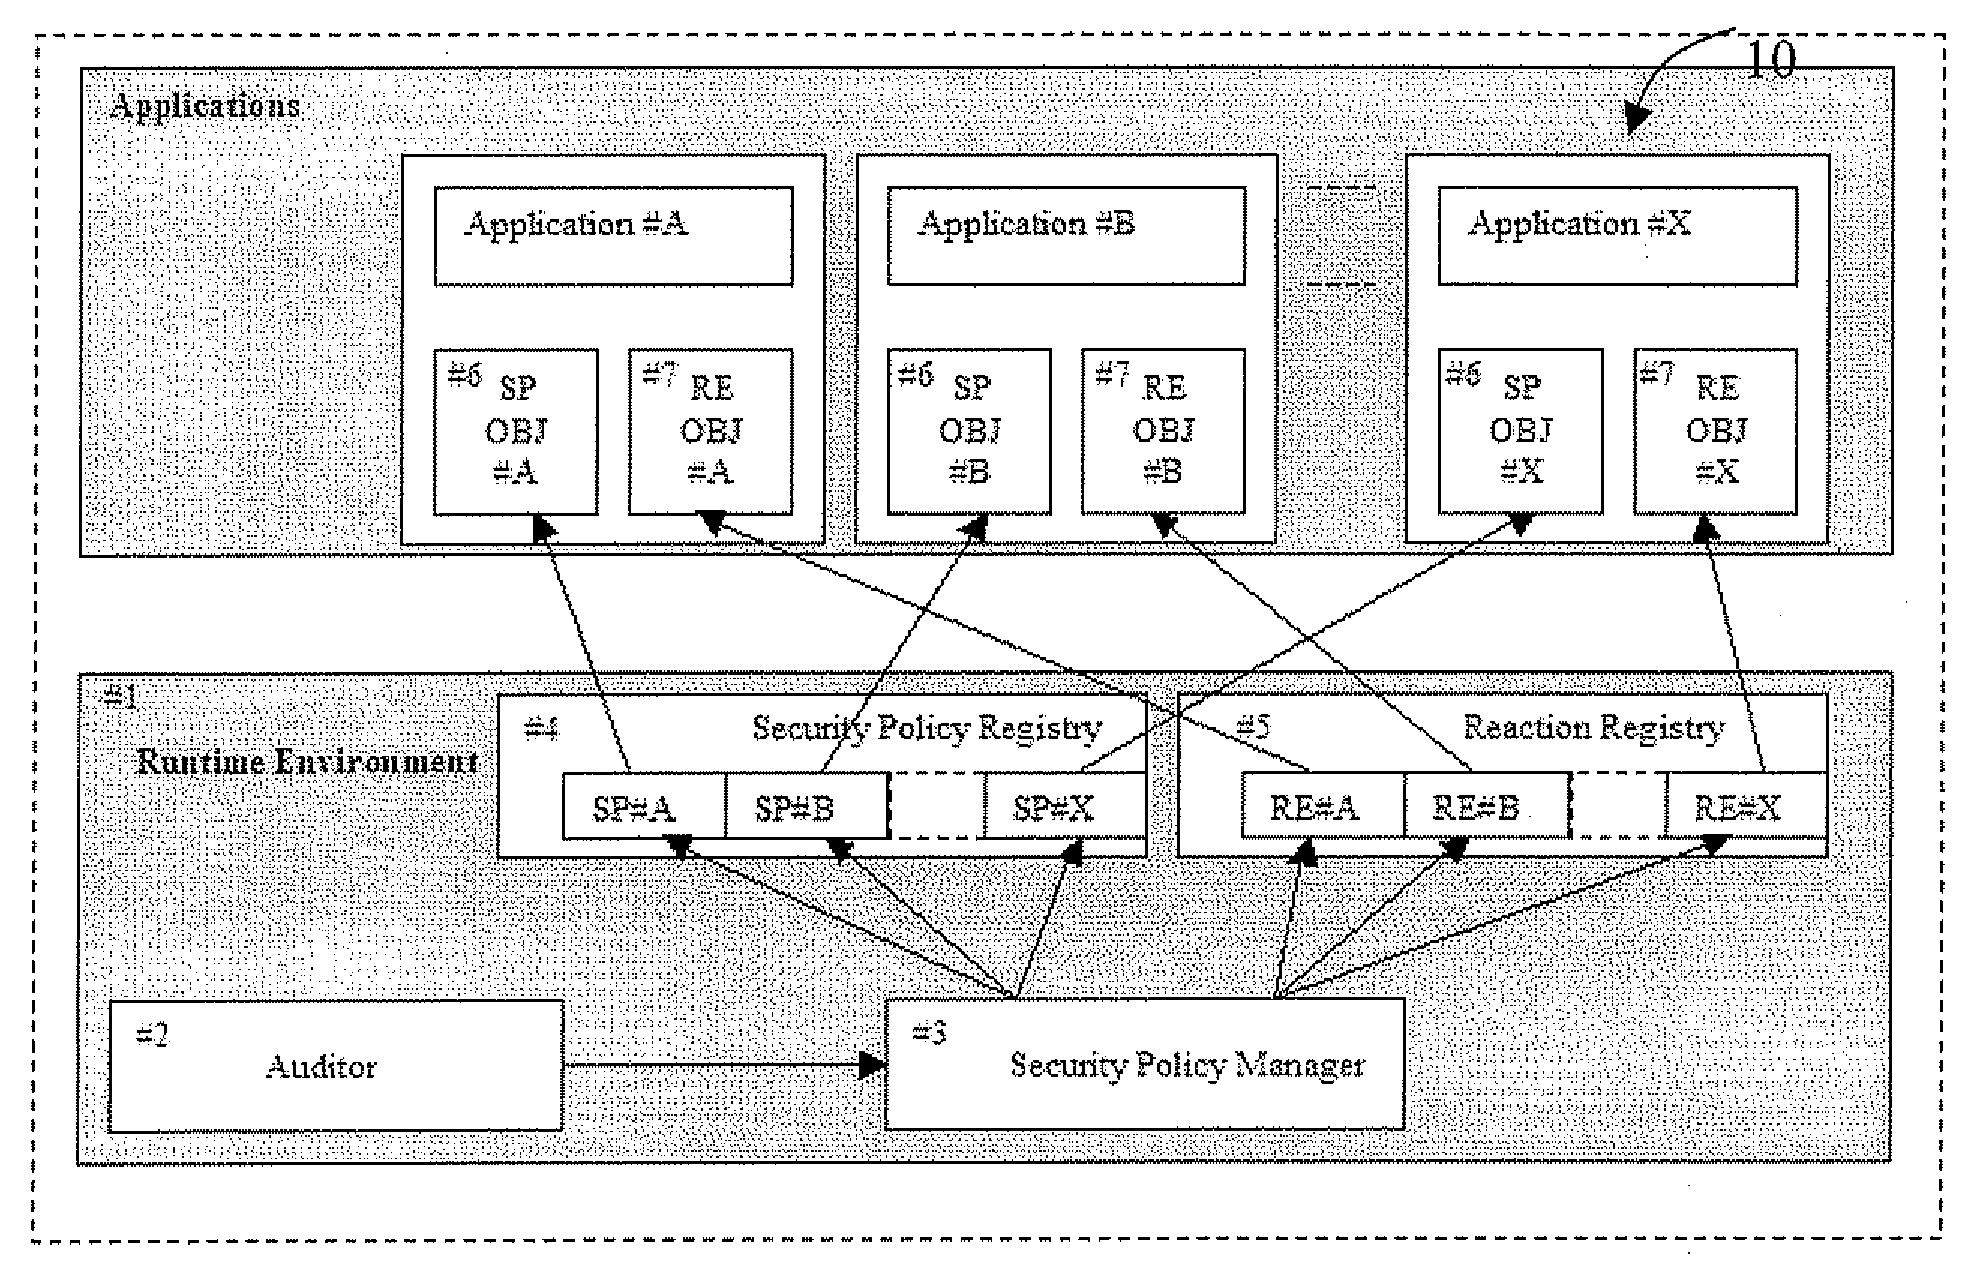 Multi-application IC card with secure management of application